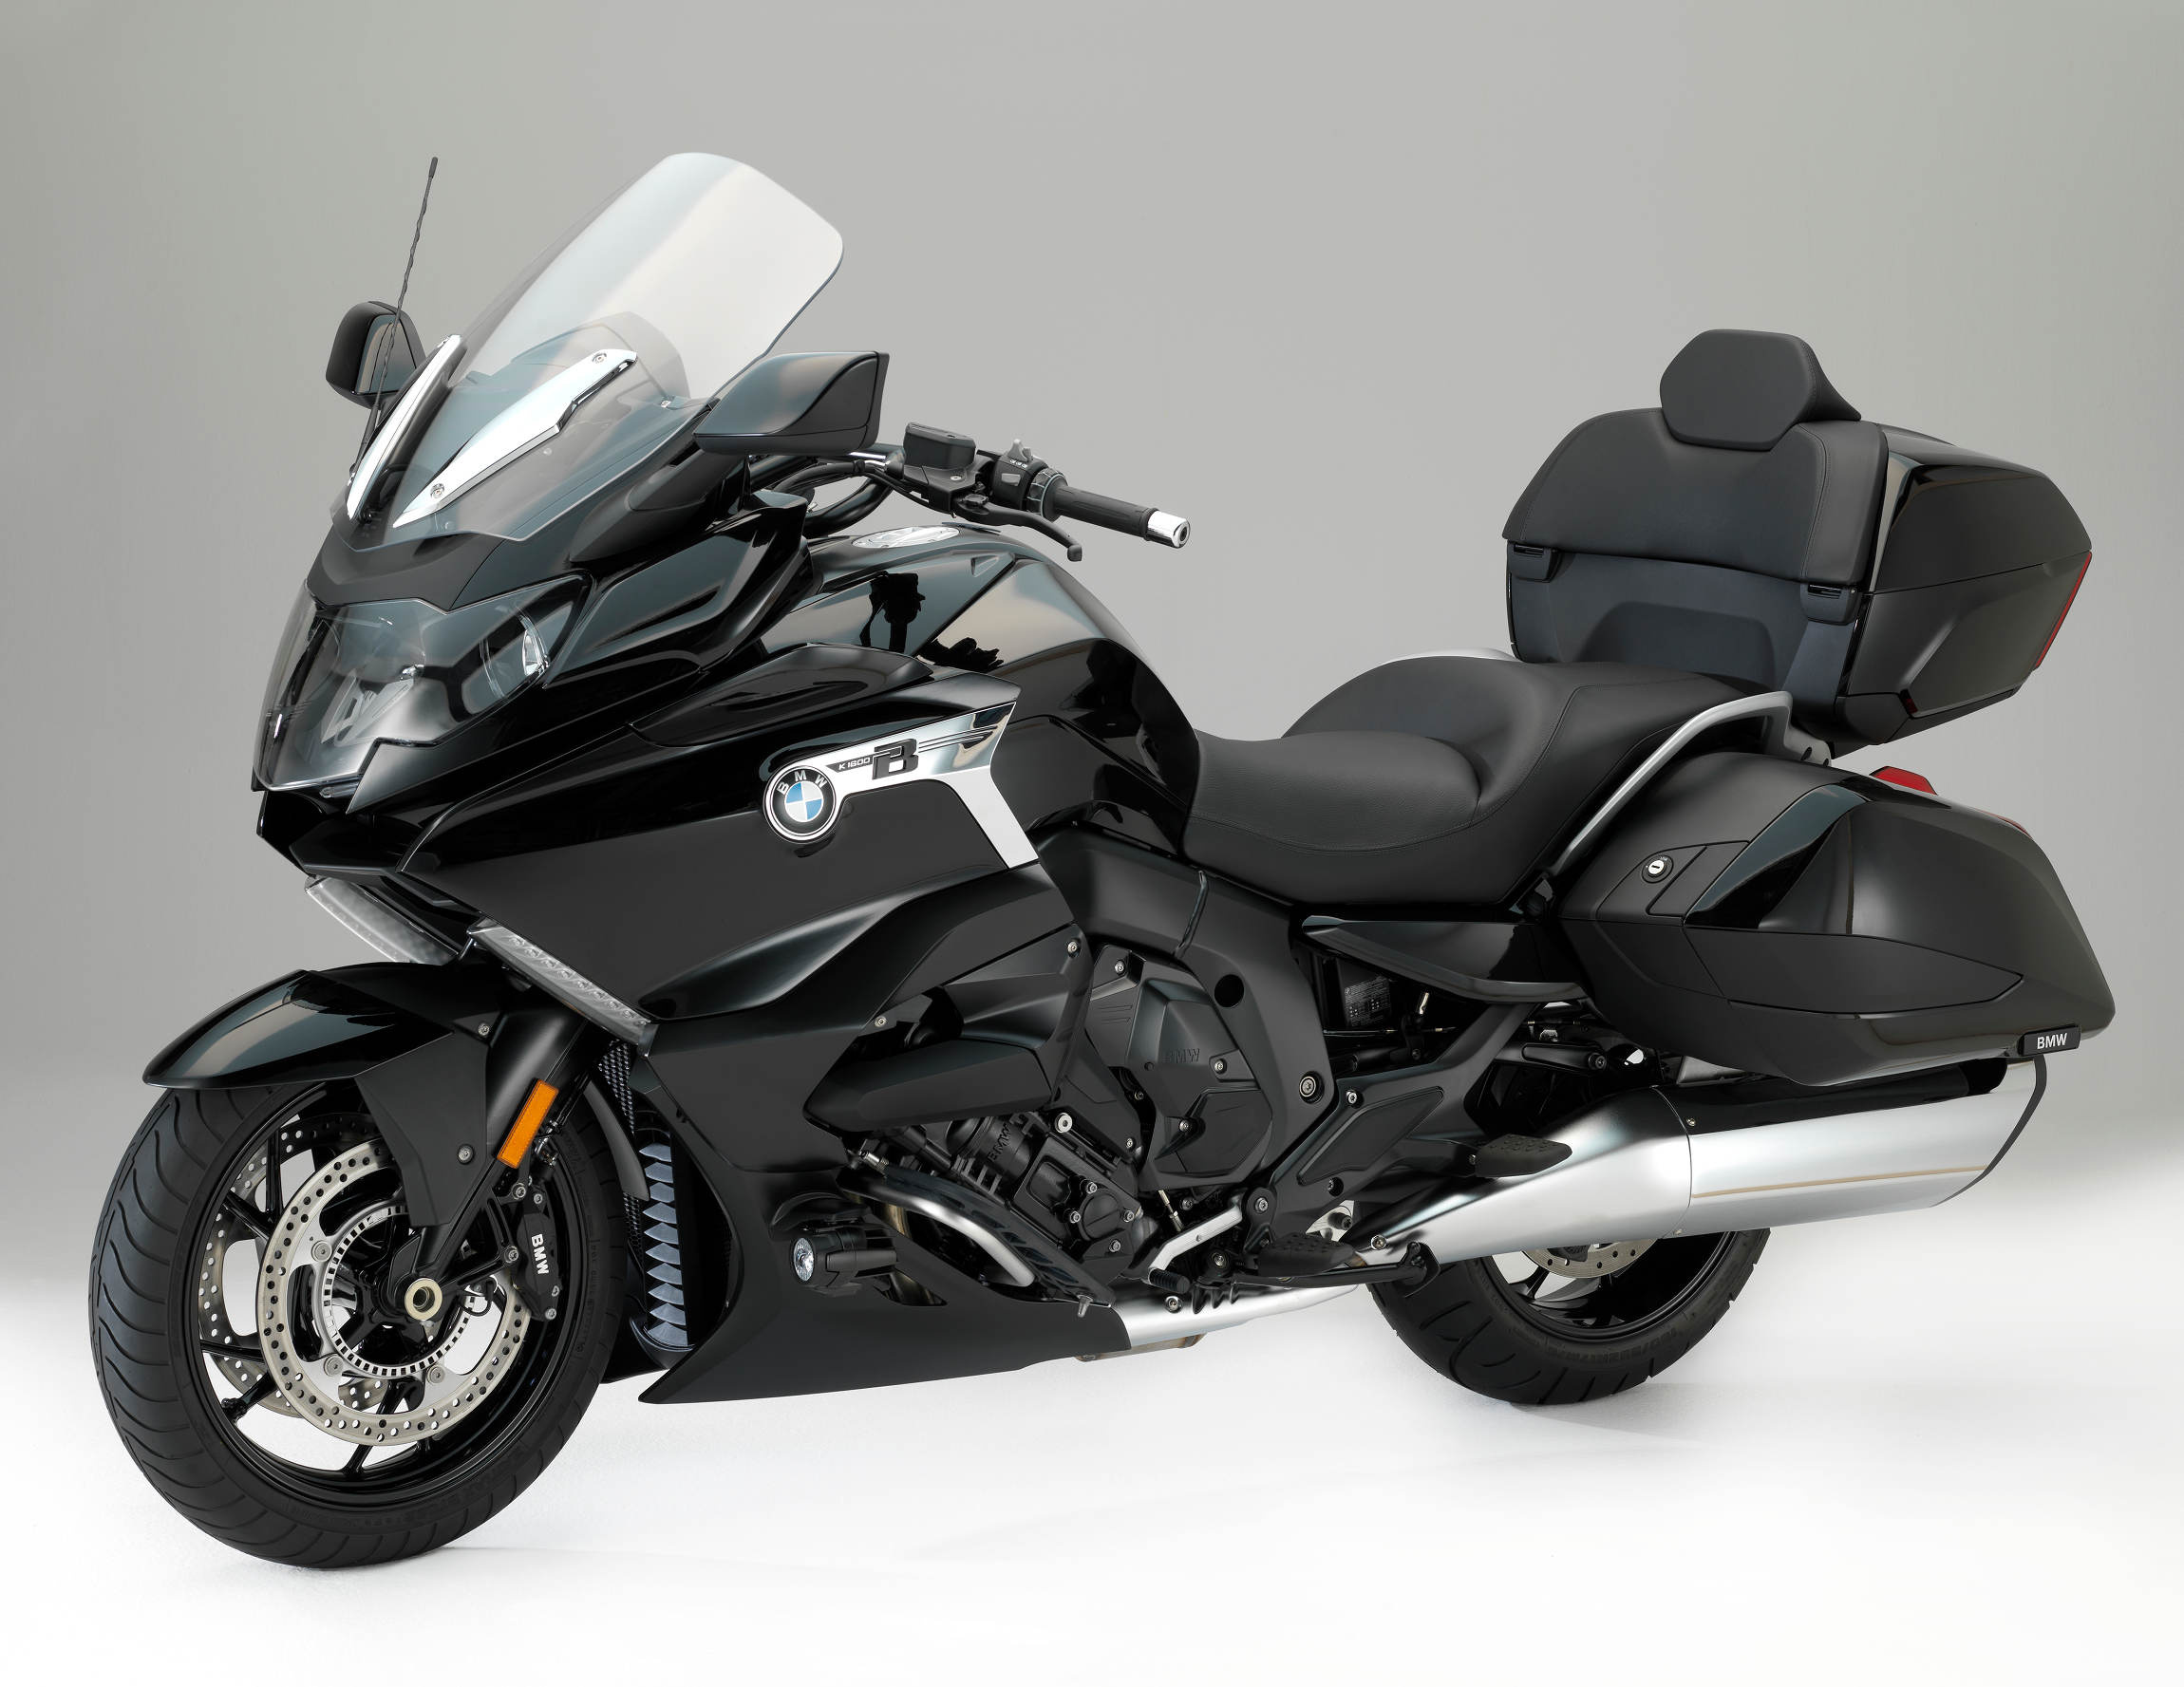 BMW K 1600 Grand America, American-style touring, Honda Gold Wing competitor, Impressive features, 2300x1780 HD Desktop